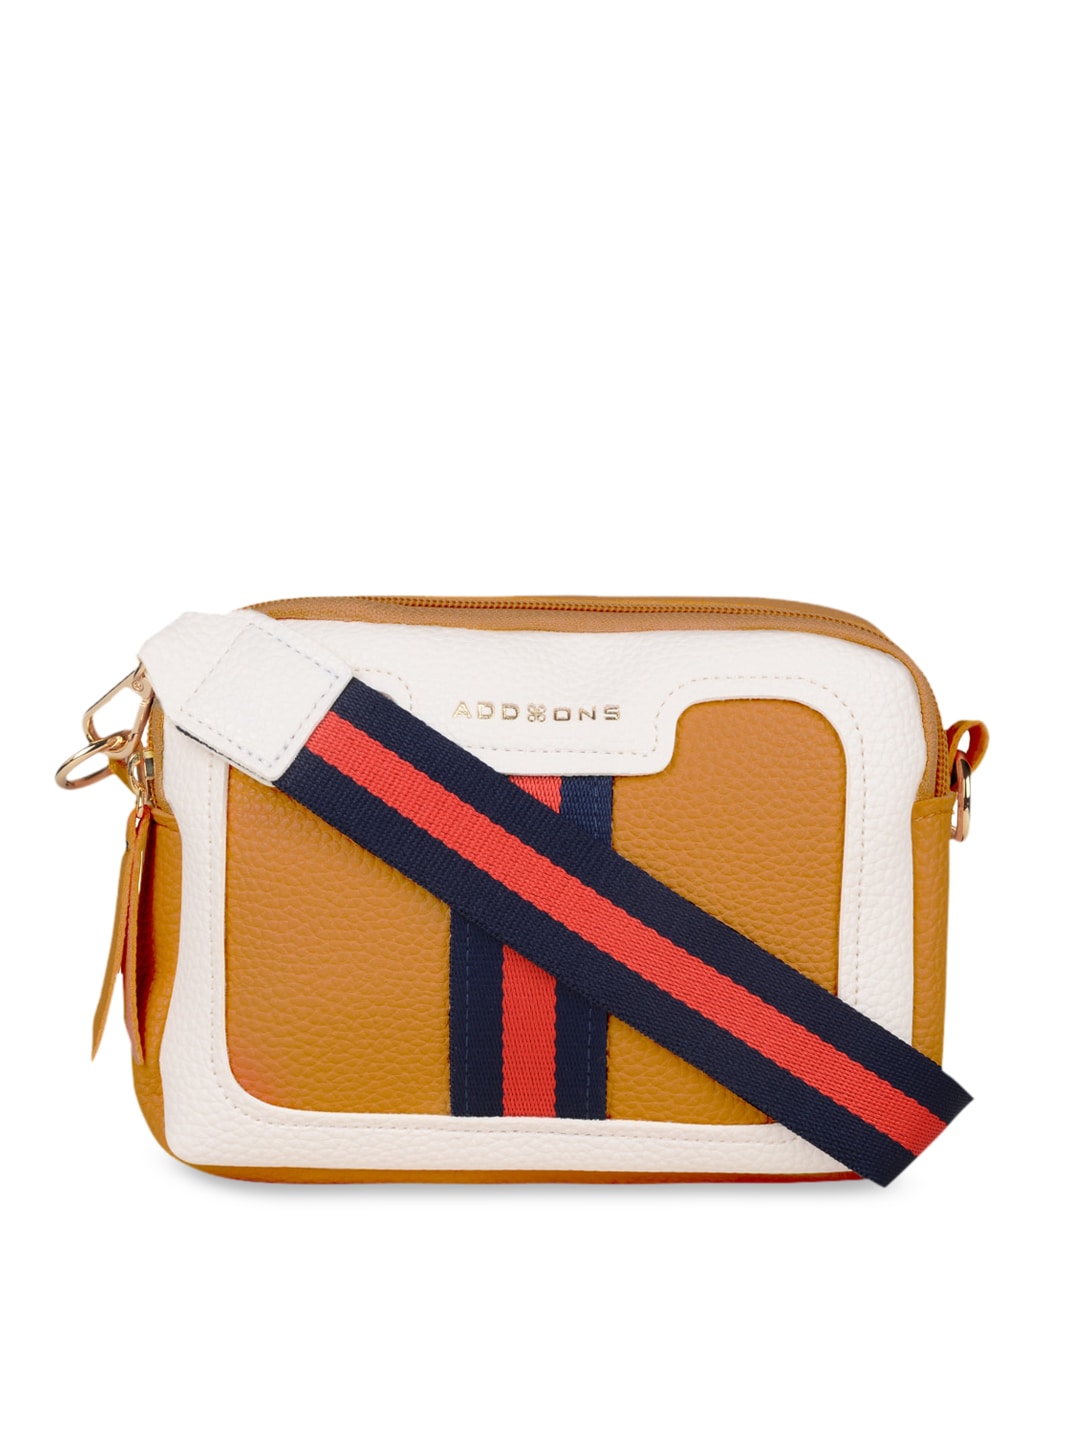 Addons Mustard Colourblocked PU Structured Sling Bag Price in India